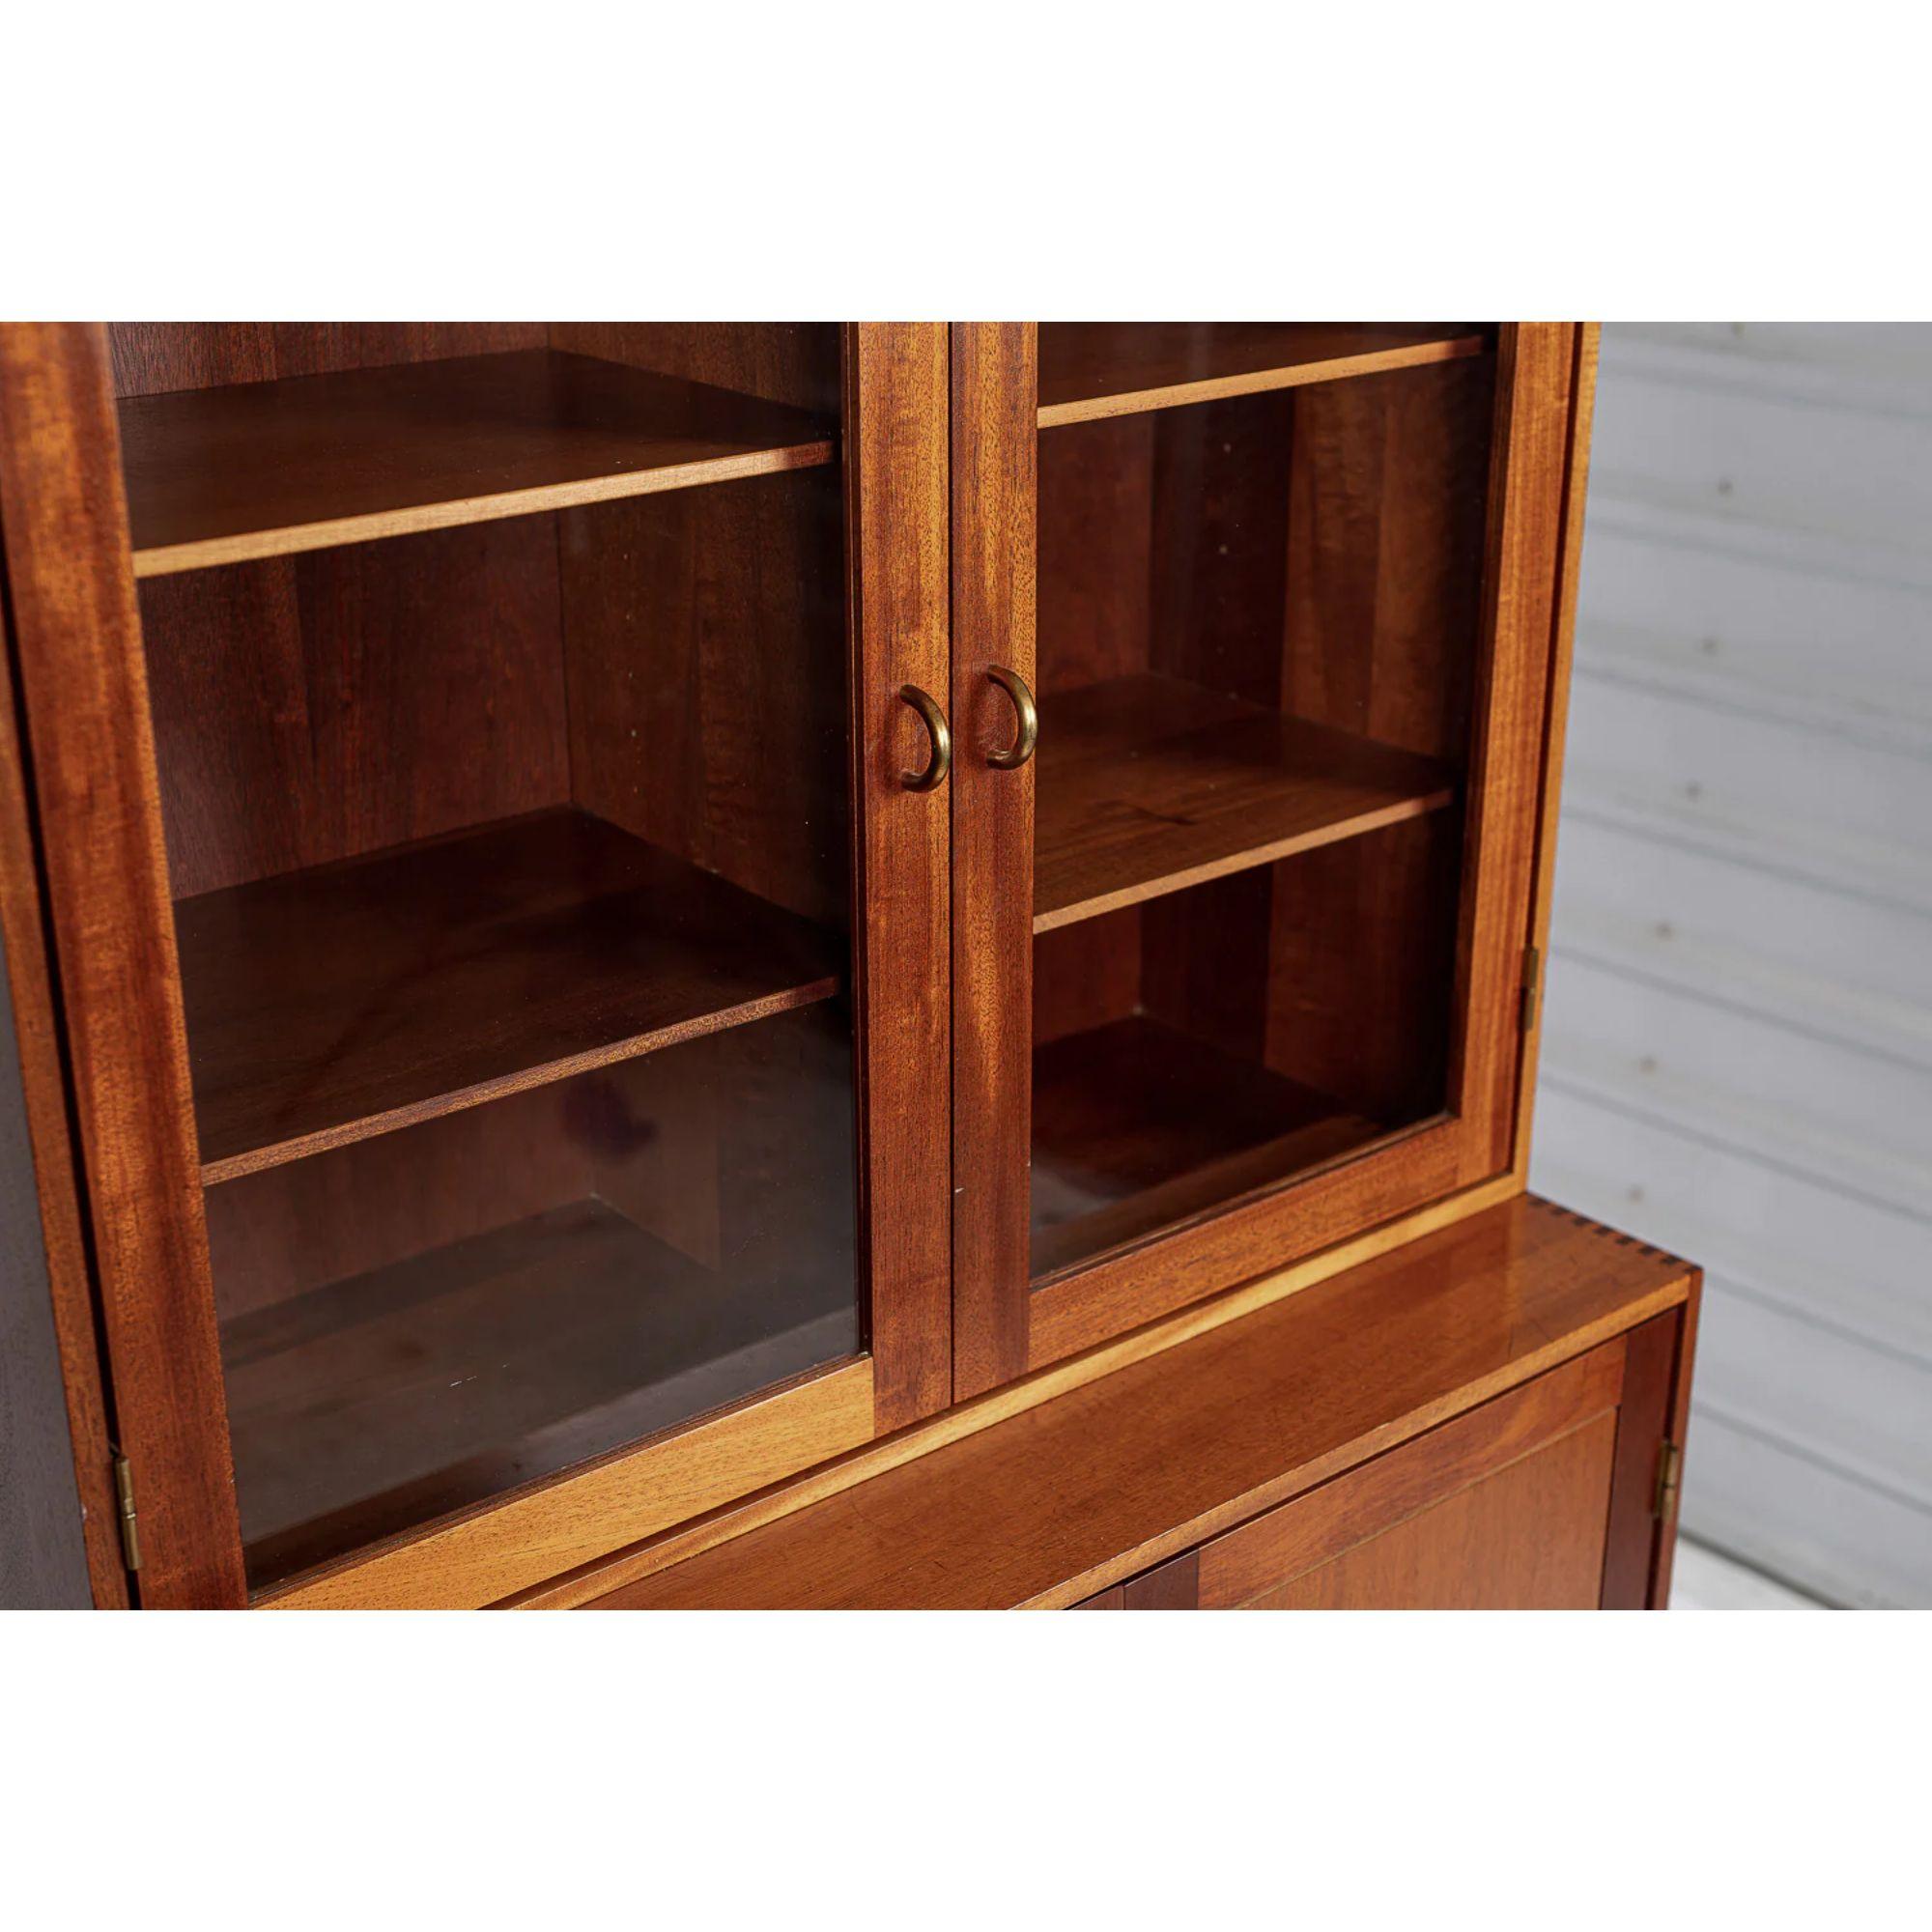 Midcentury Danish Wood Storage Cabinets with Glass Doors & File Drawer 2